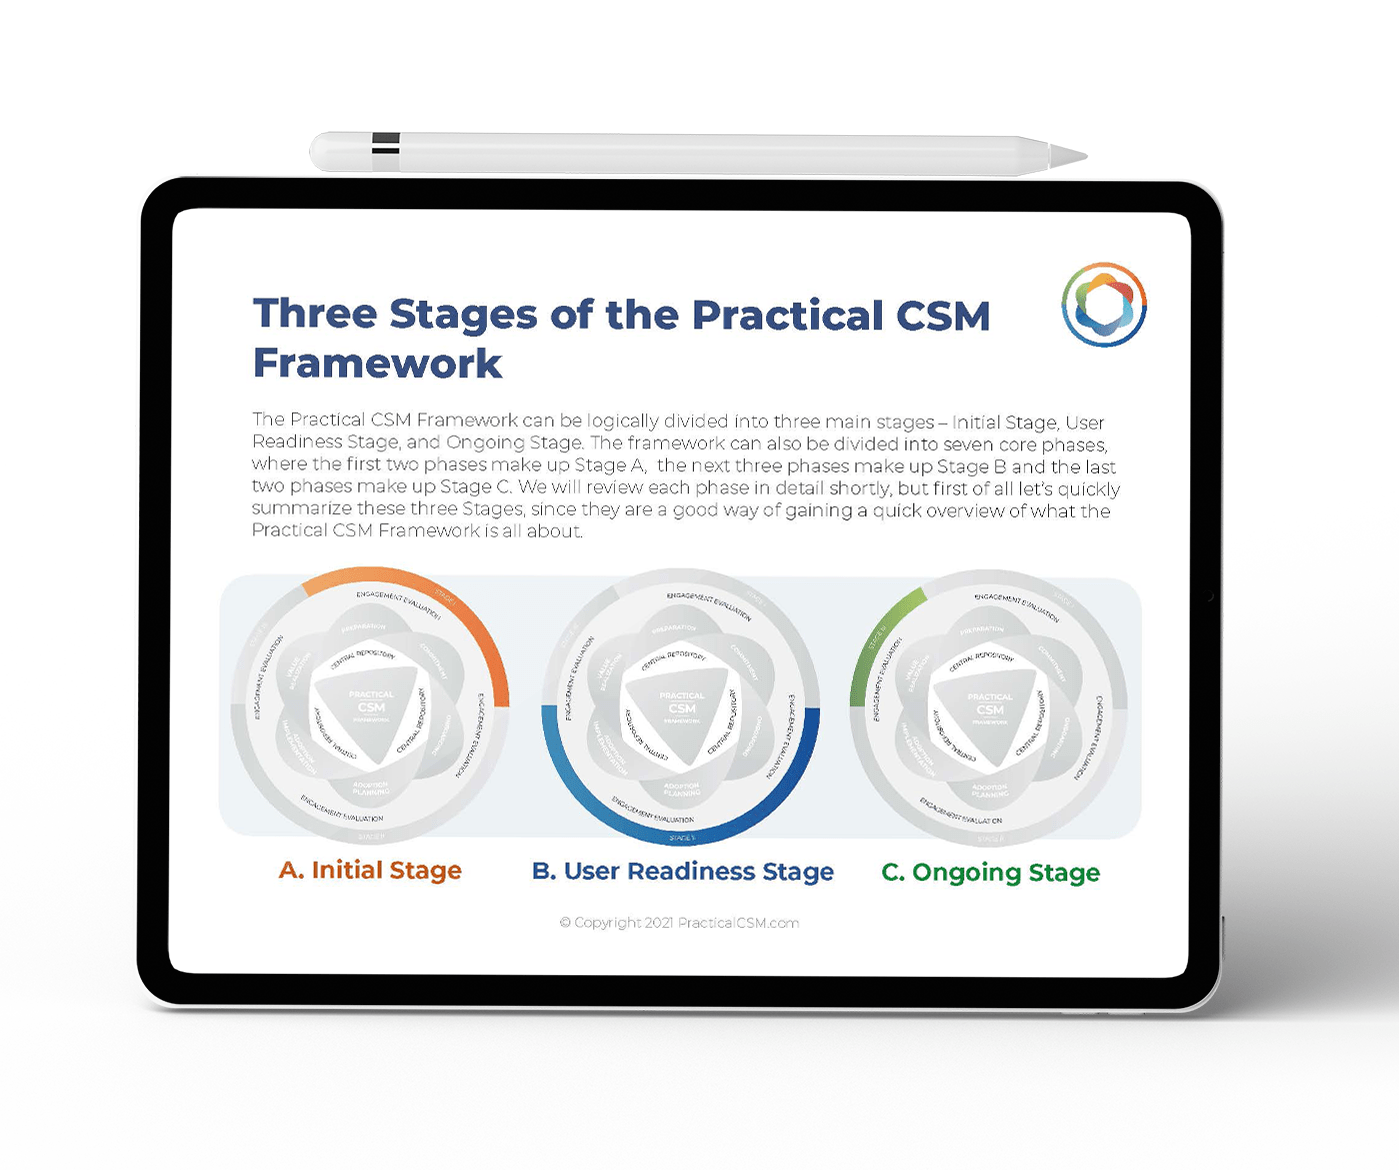 Three Stages Of Practical CSM Framework